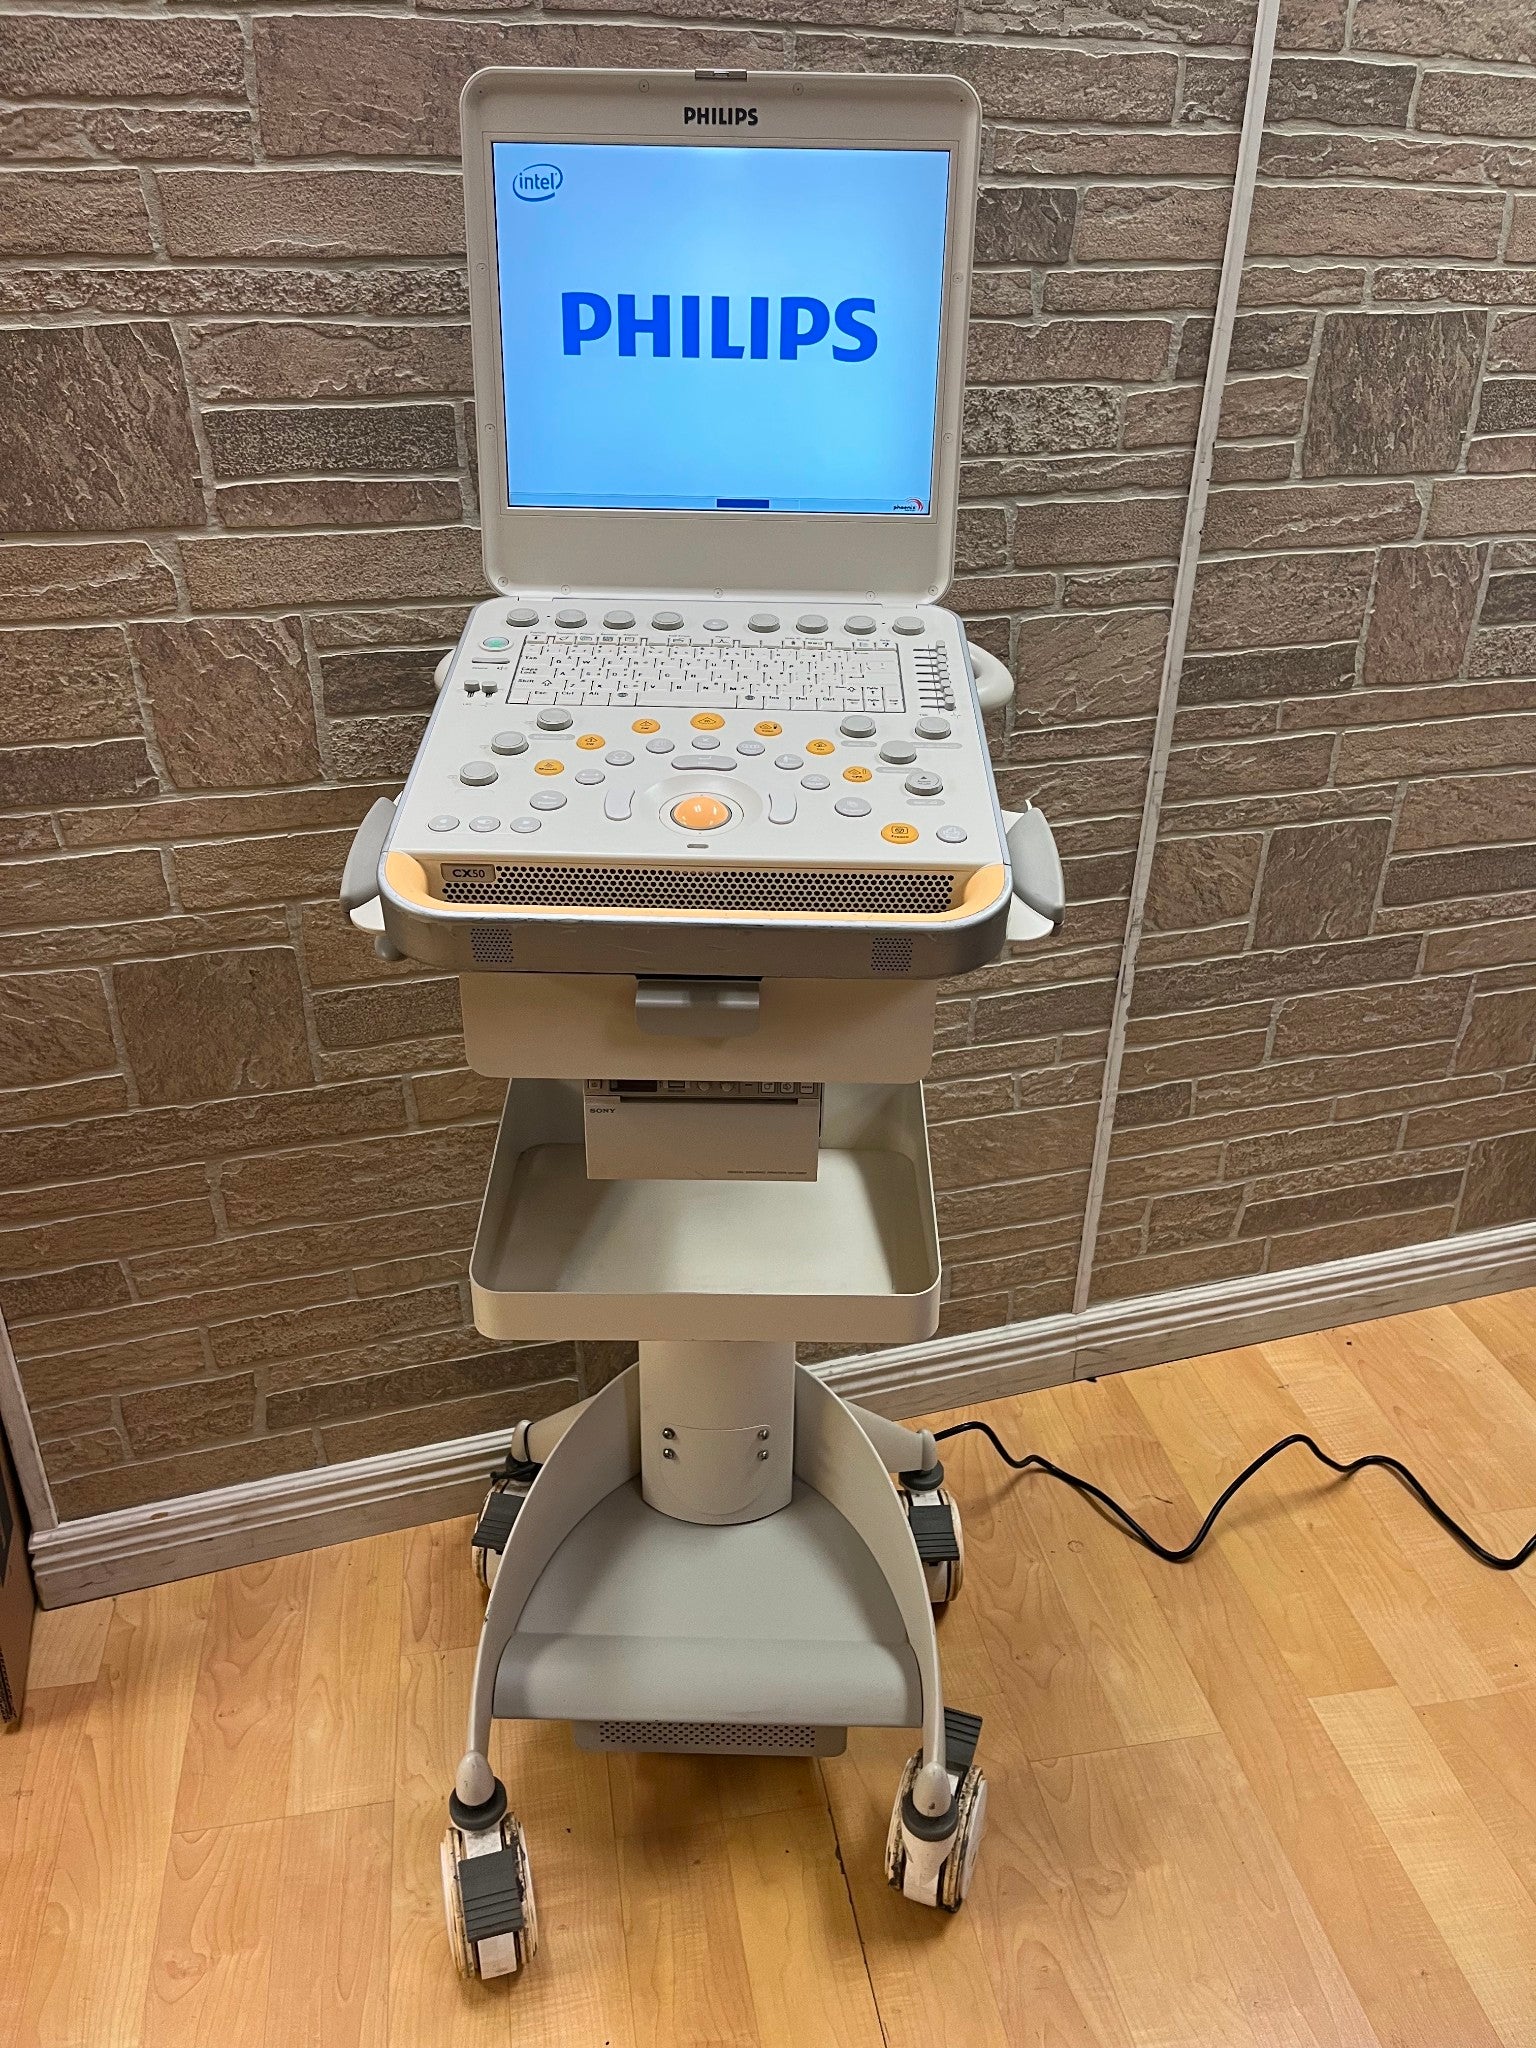 Philips CX50 Ultrasound Scanner Machine 2011 with cart DIAGNOSTIC ULTRASOUND MACHINES FOR SALE